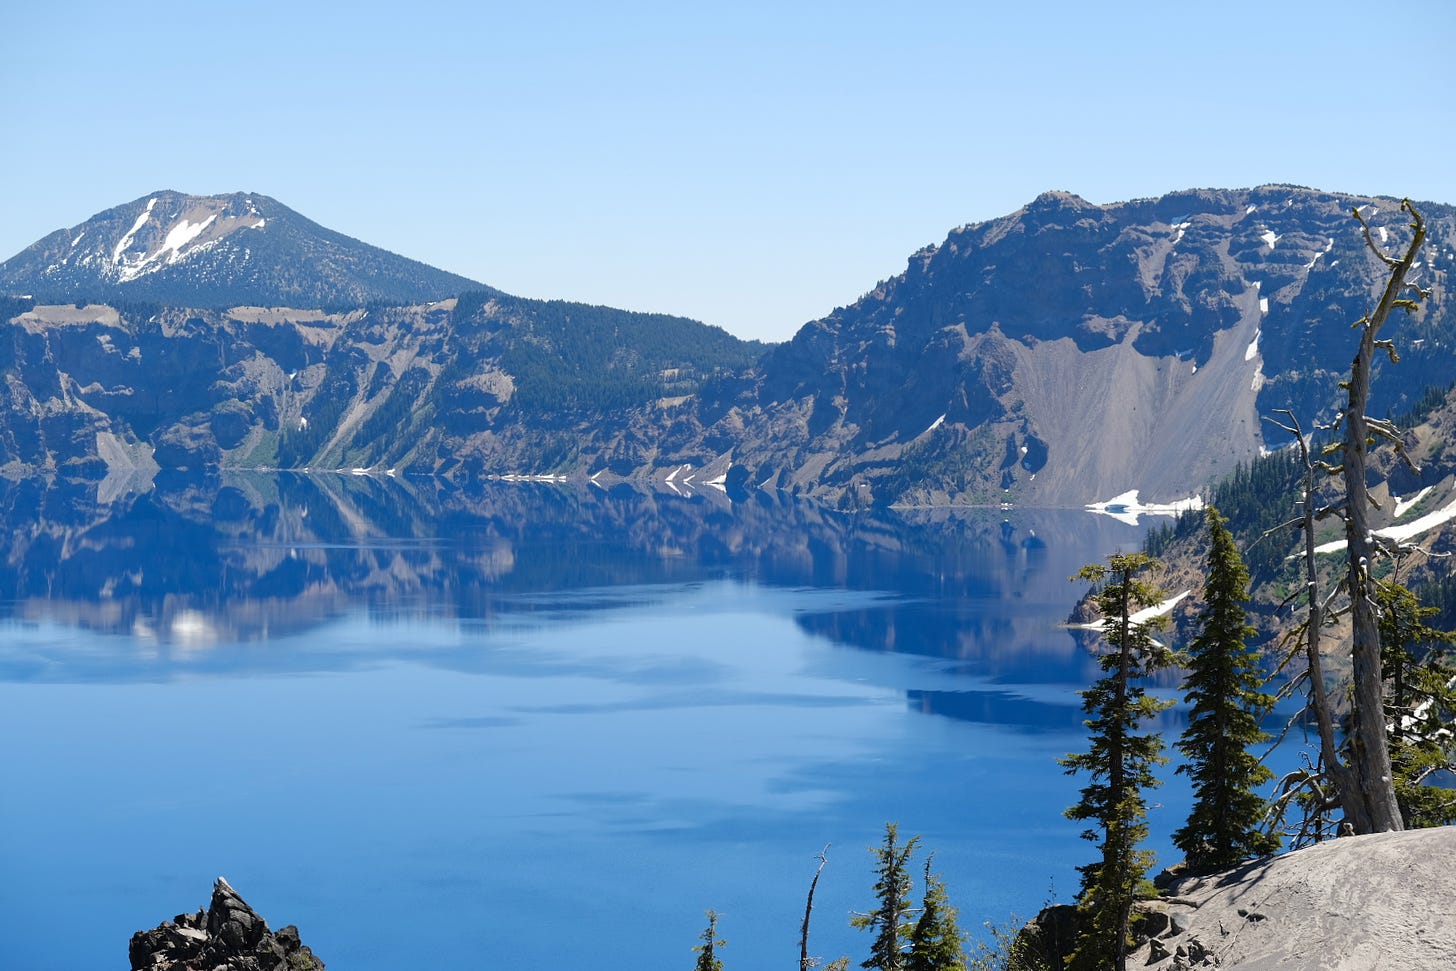 An image of blue skies and the rim of Crater lake reflected in the body of the lake.  rater lake